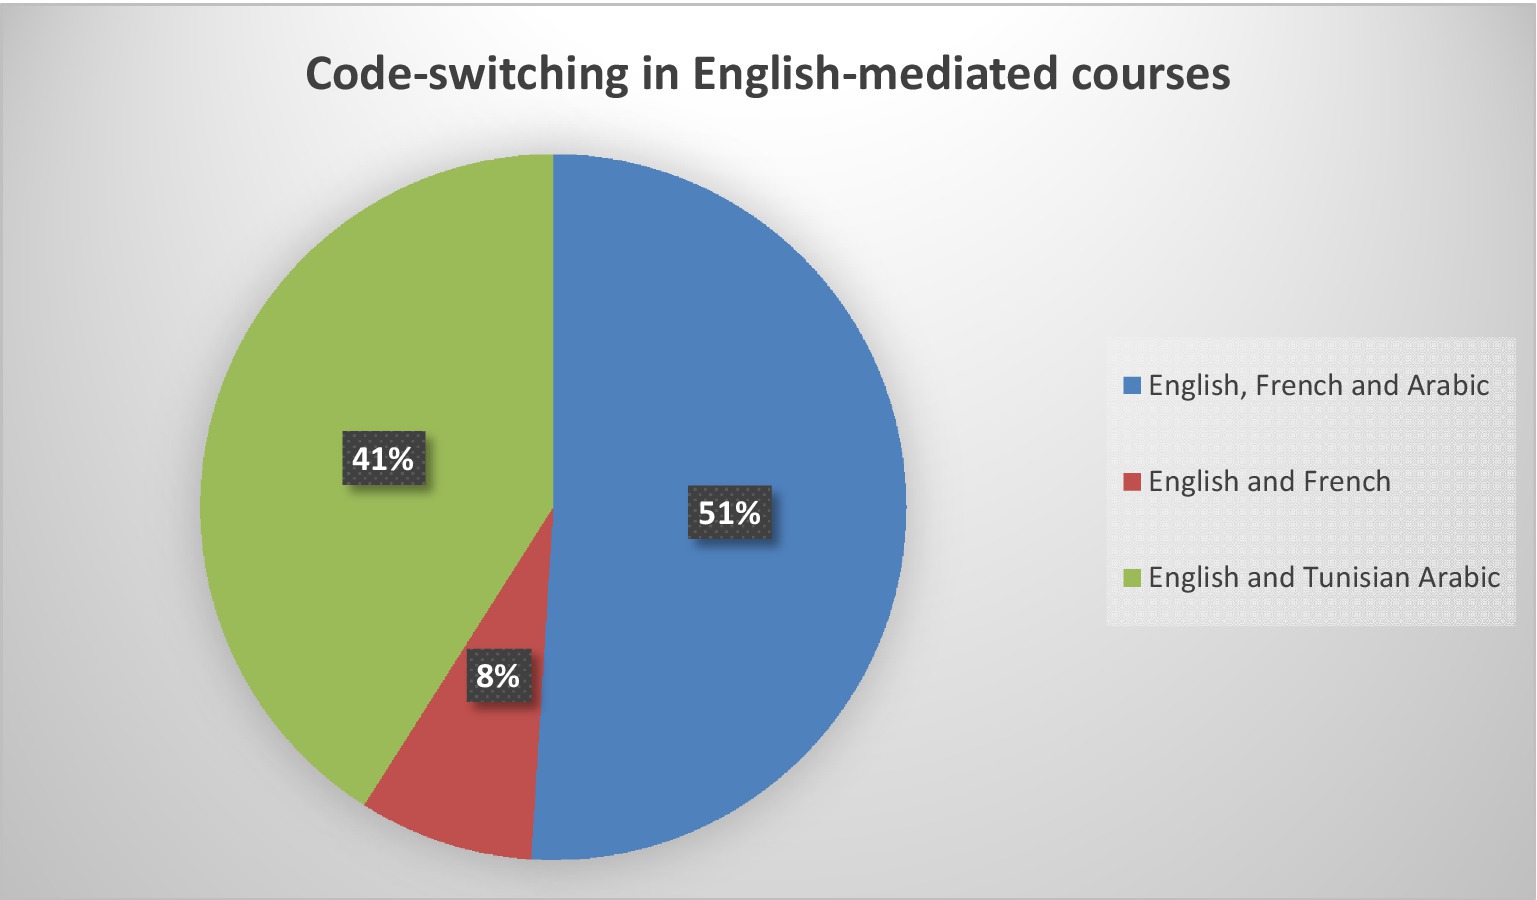 Codeswitching in primary mathematics lessons: sociocultural